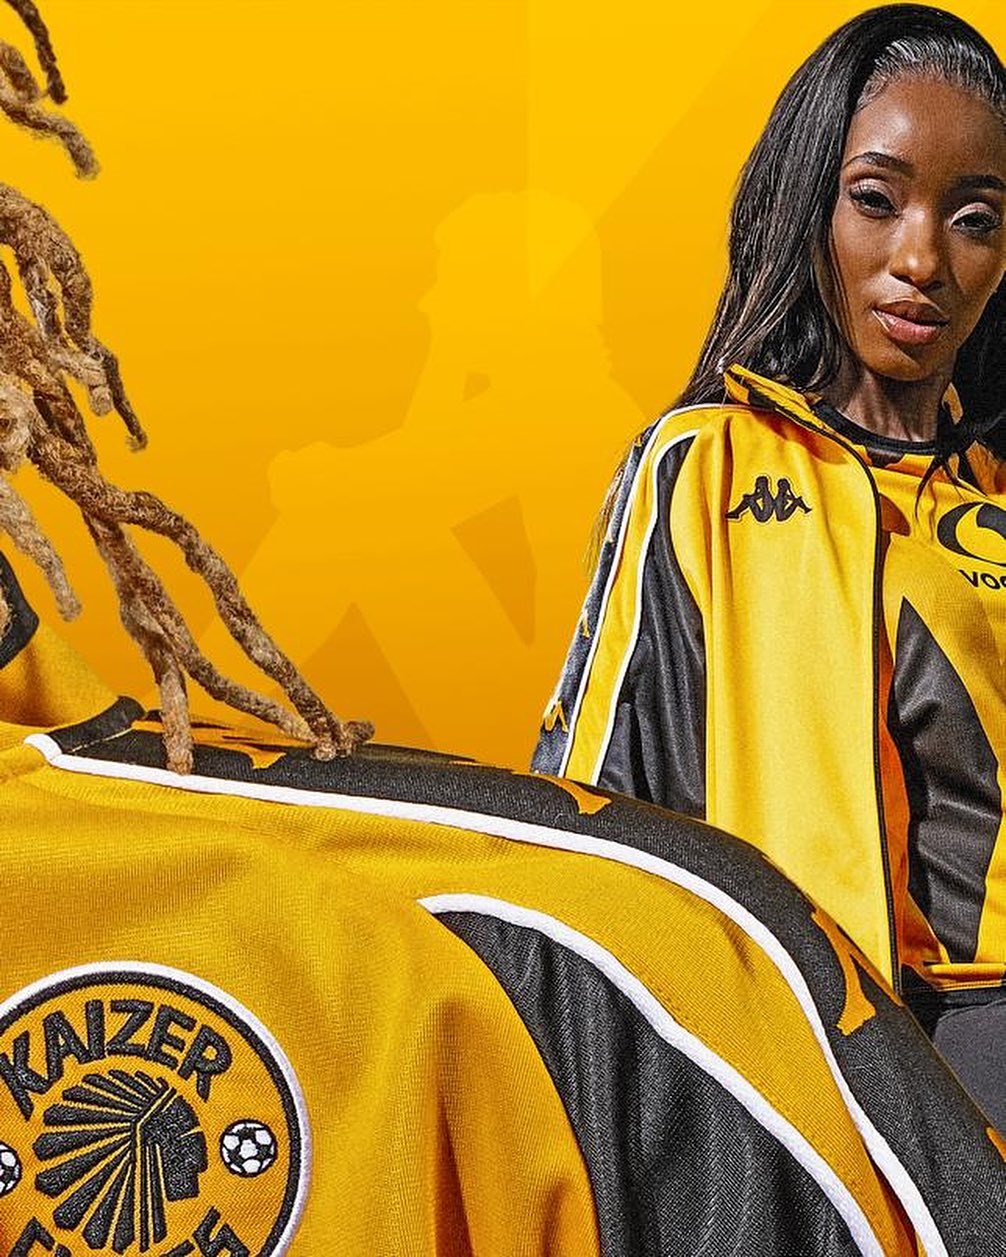 WATCH  Kaizer Chiefs unveil new Kappa jersey at glitzy function